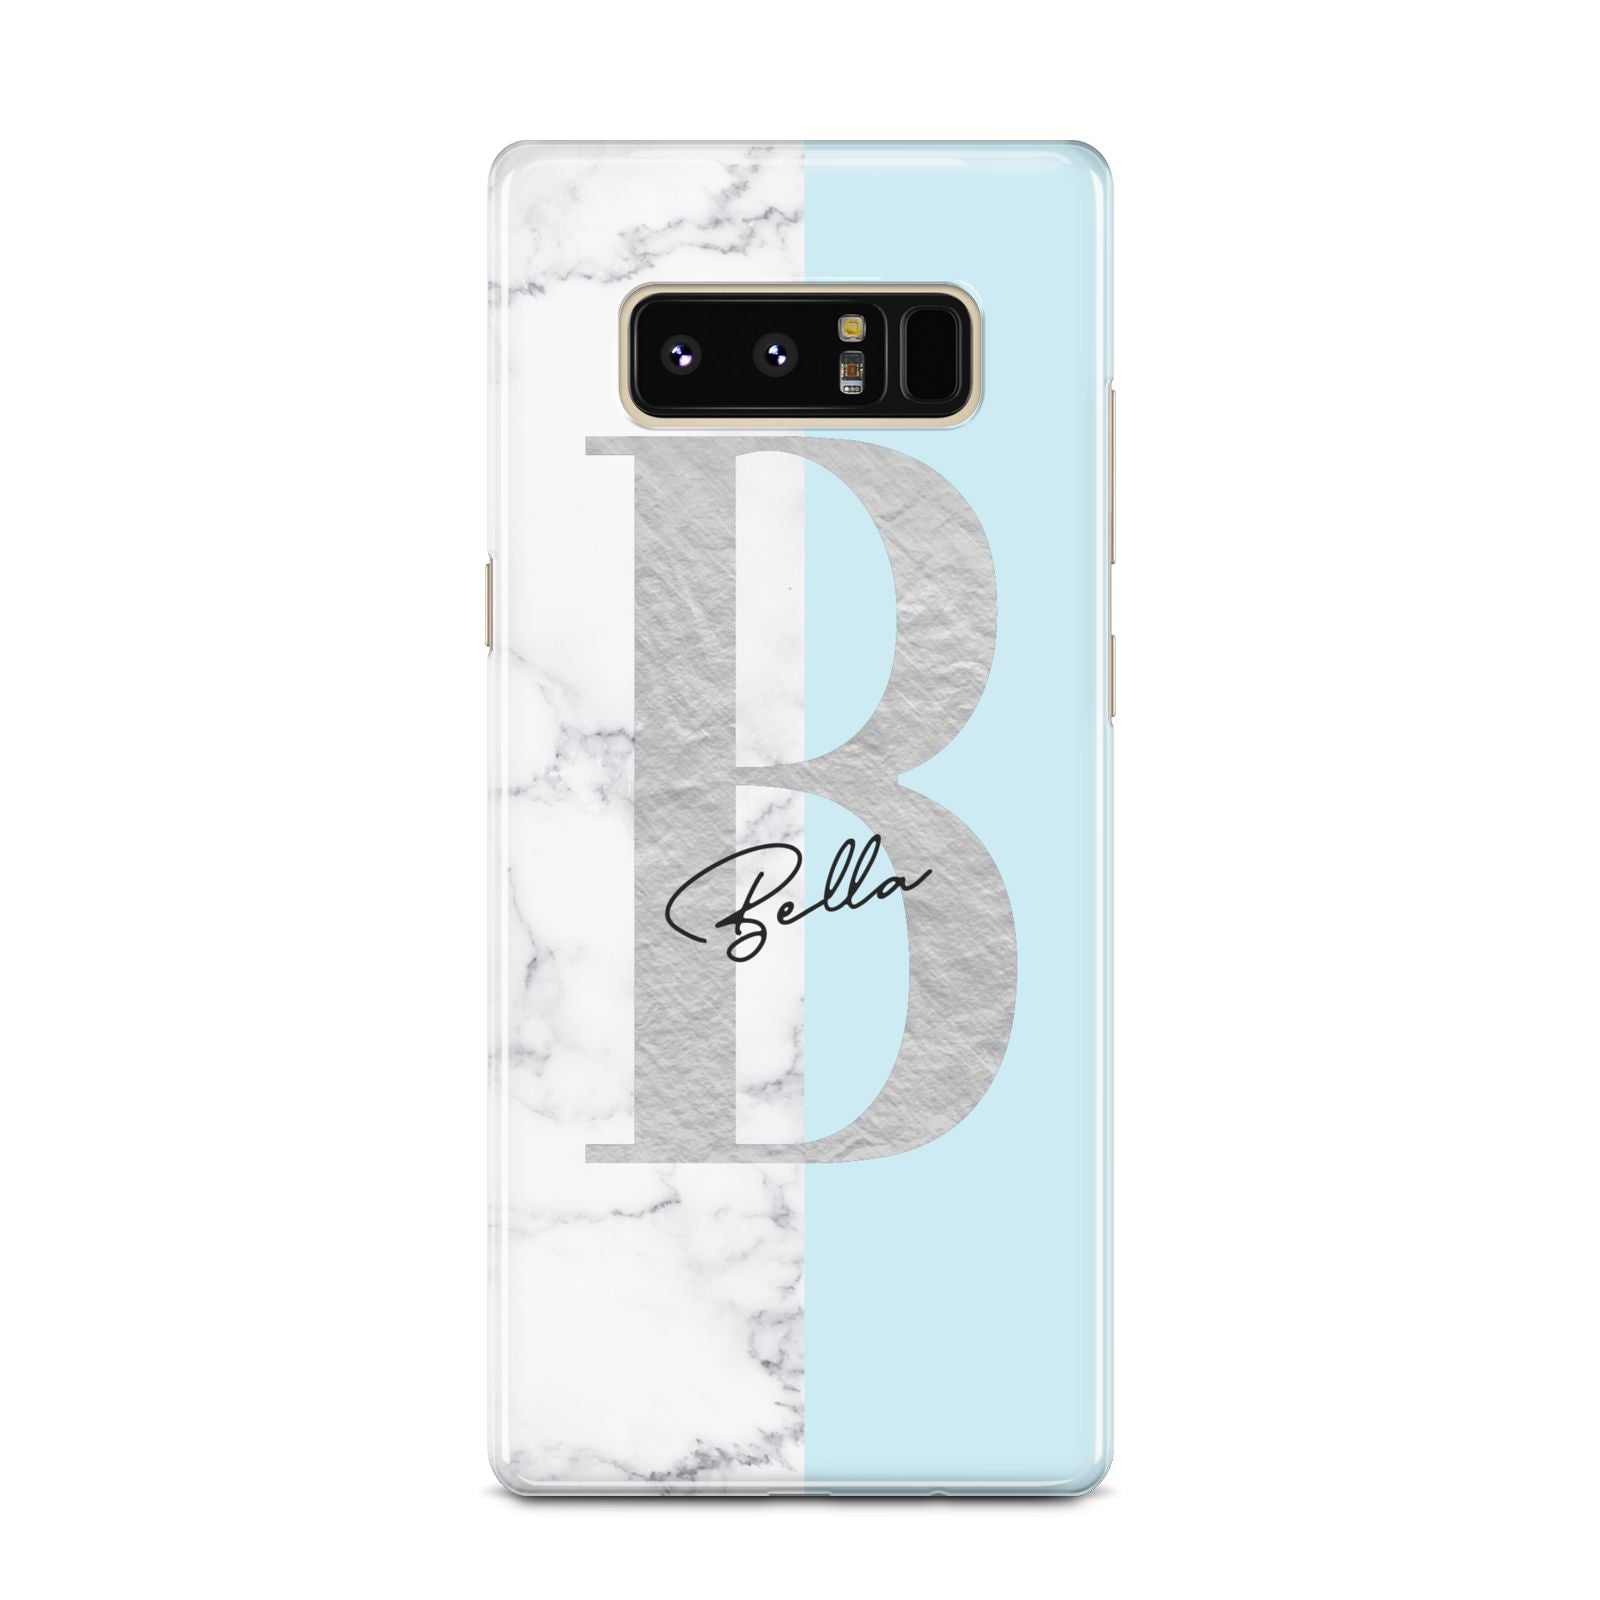 Personalised Chrome Marble Samsung Galaxy Note 8 Case